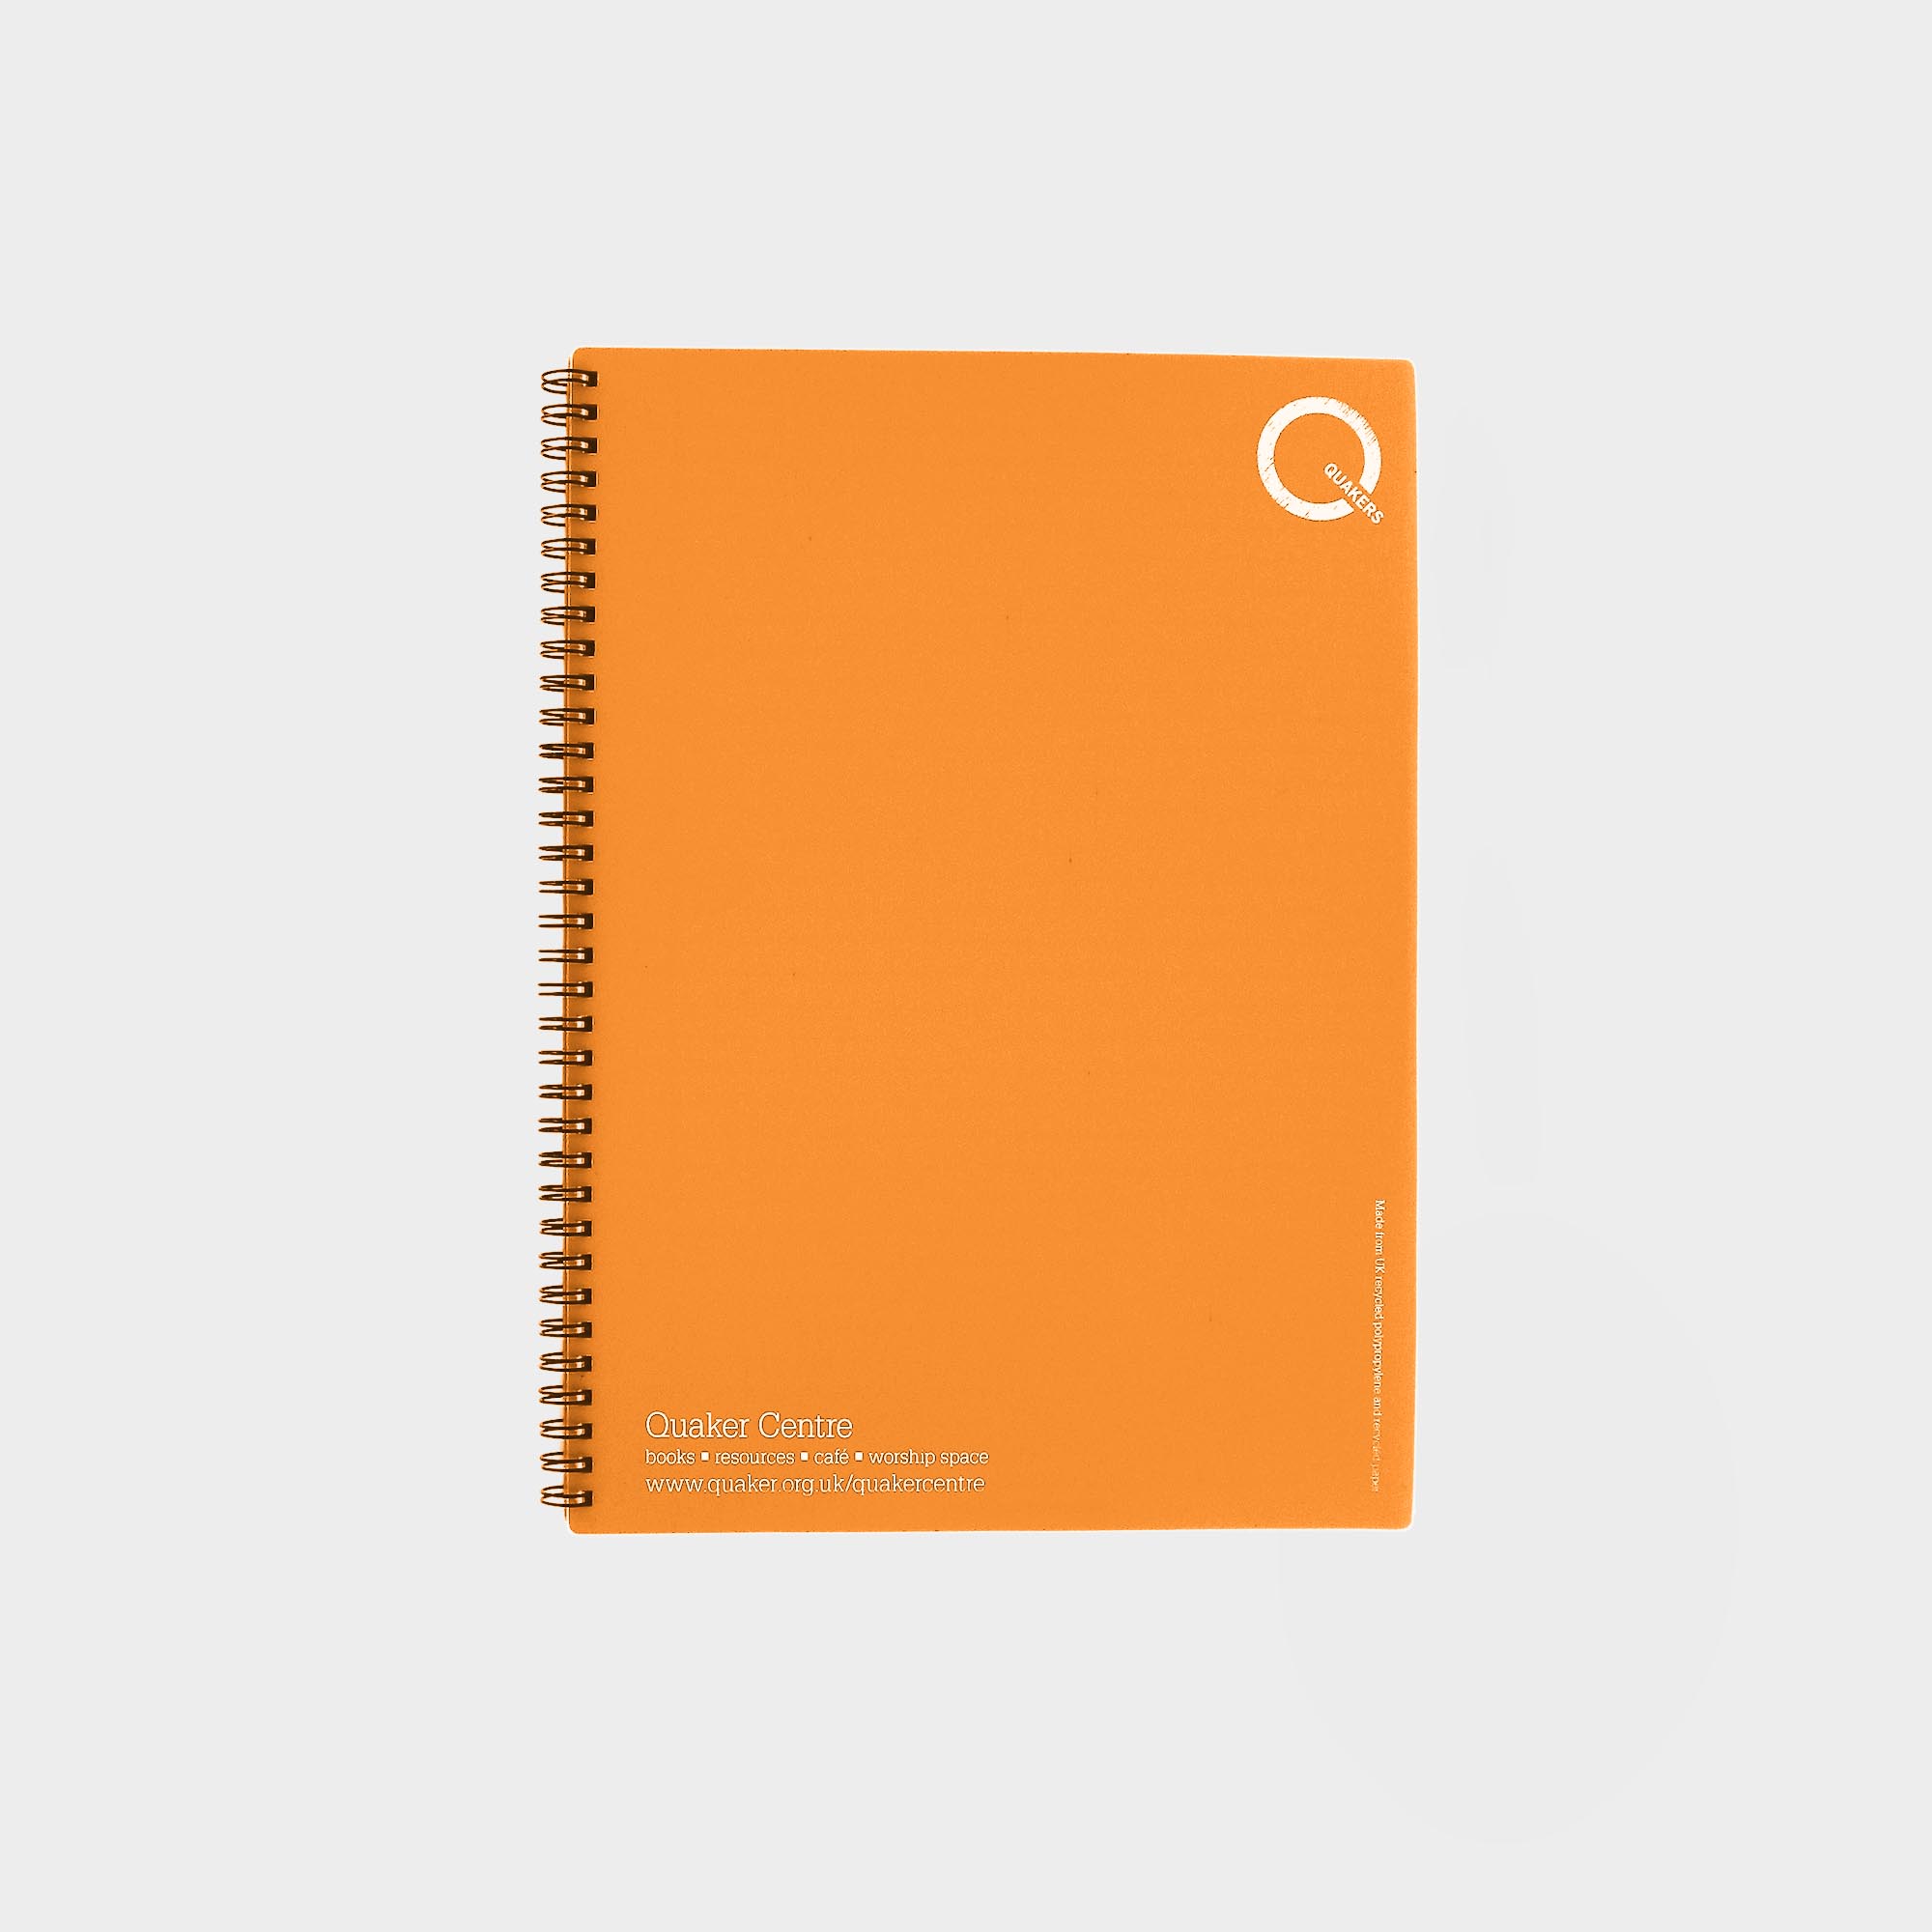 The Green & Good Polypropylene Notebook comes with recycled paper - size A4. The front and back cover is made from recycled polypropylene (500 microns), the sheets are 80gsm. Comes wirebound with 50 sheets as standard. Please contact us if you require a bespoke number of sheets. Orange